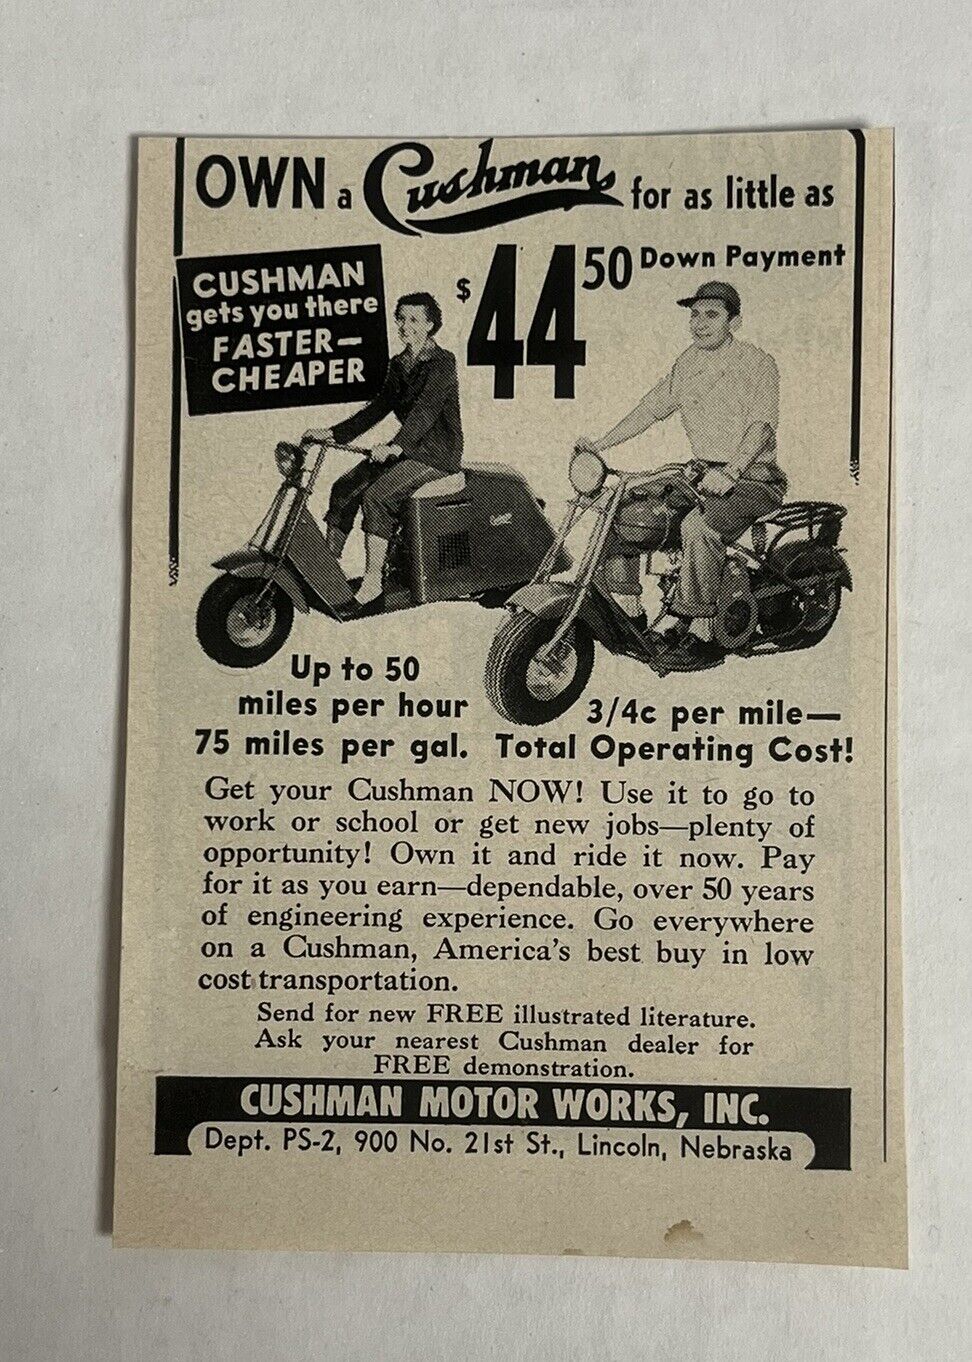 1953 Cushman Motors: Print Ad Gets You There Faster Cheaper 21st Lincoln Neb